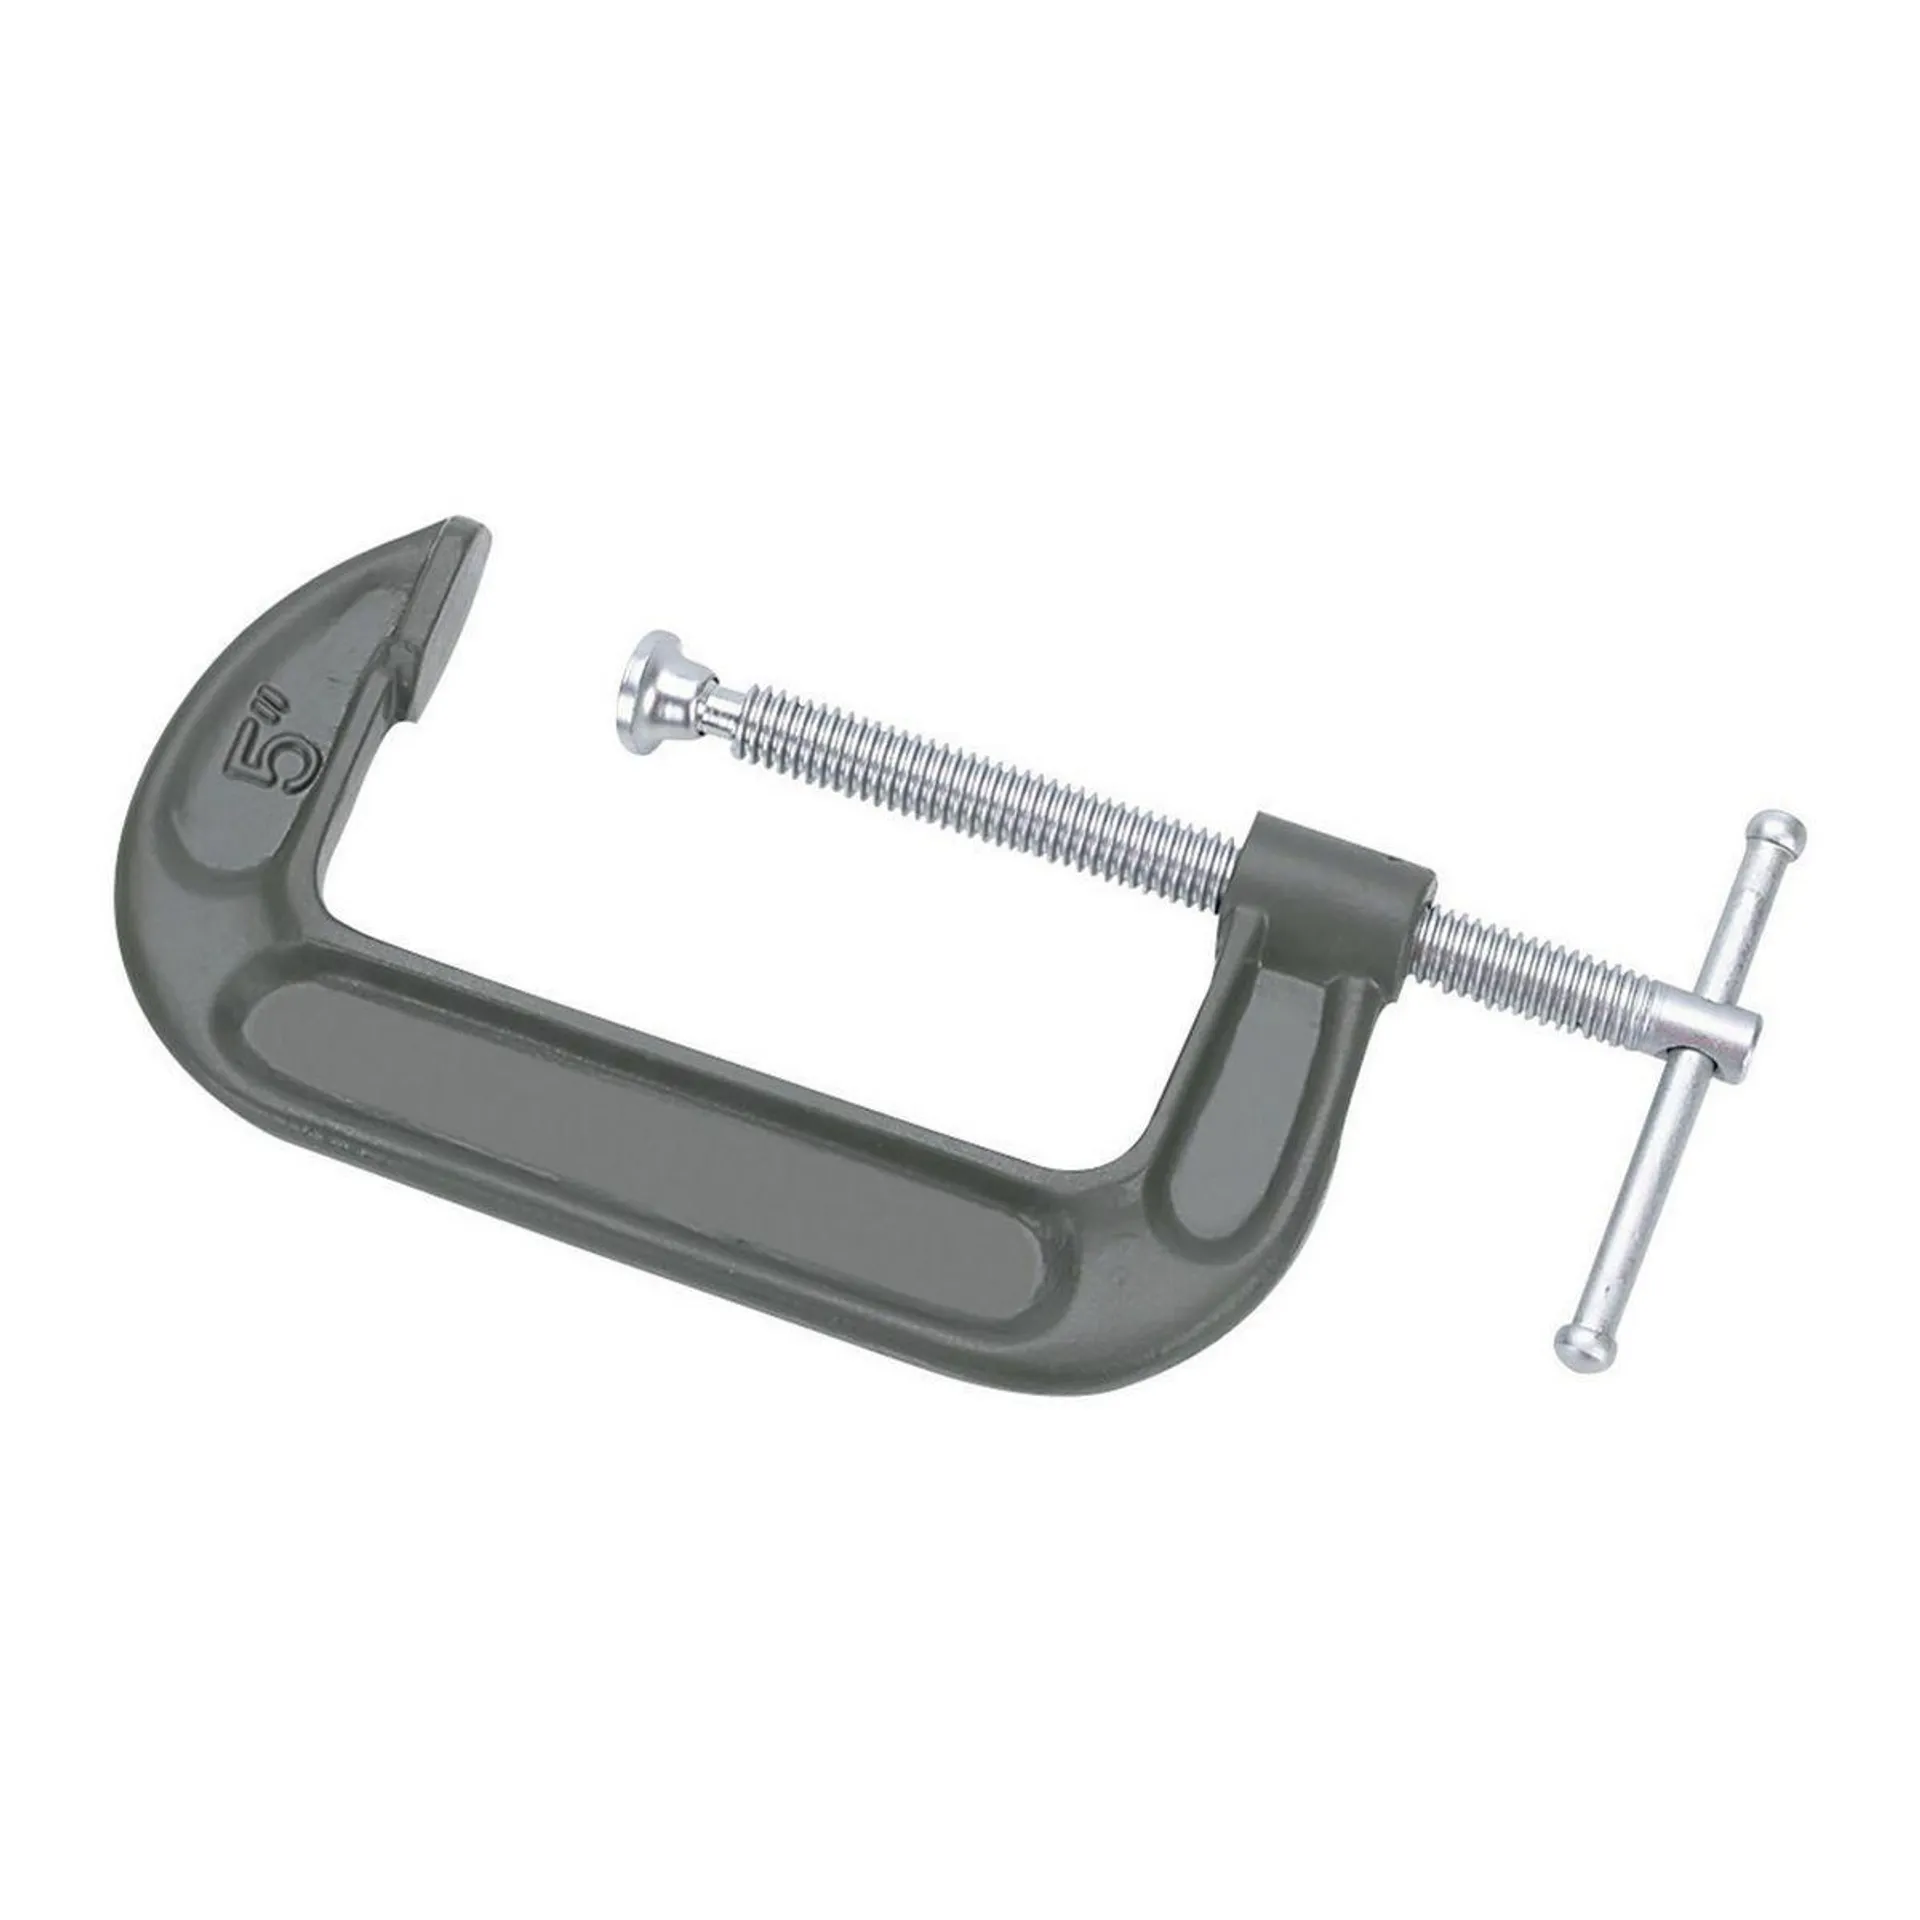 PITTSBURGH 5 in. C-Clamp